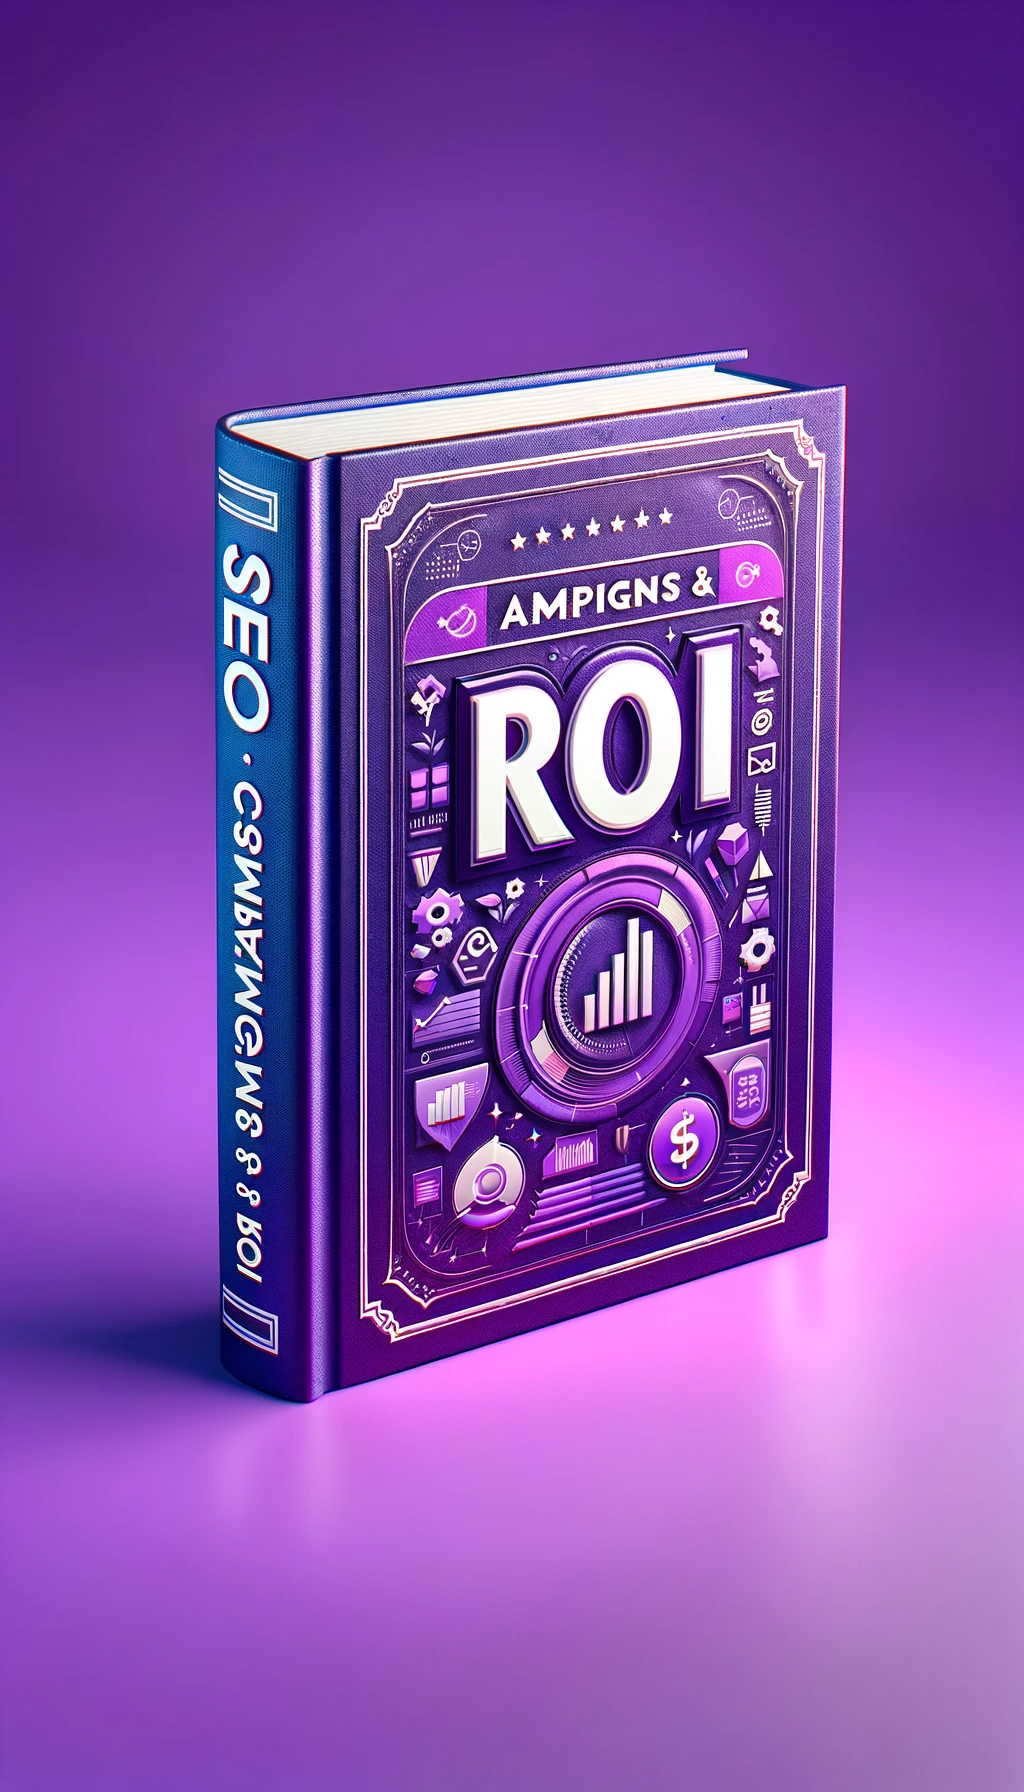 DALL·E 2023 11 30 16.00.47 Create a realistic image of a standing book titled SEO Campaigns ROI. The book cover should have a vibrant purple color that dominates the design